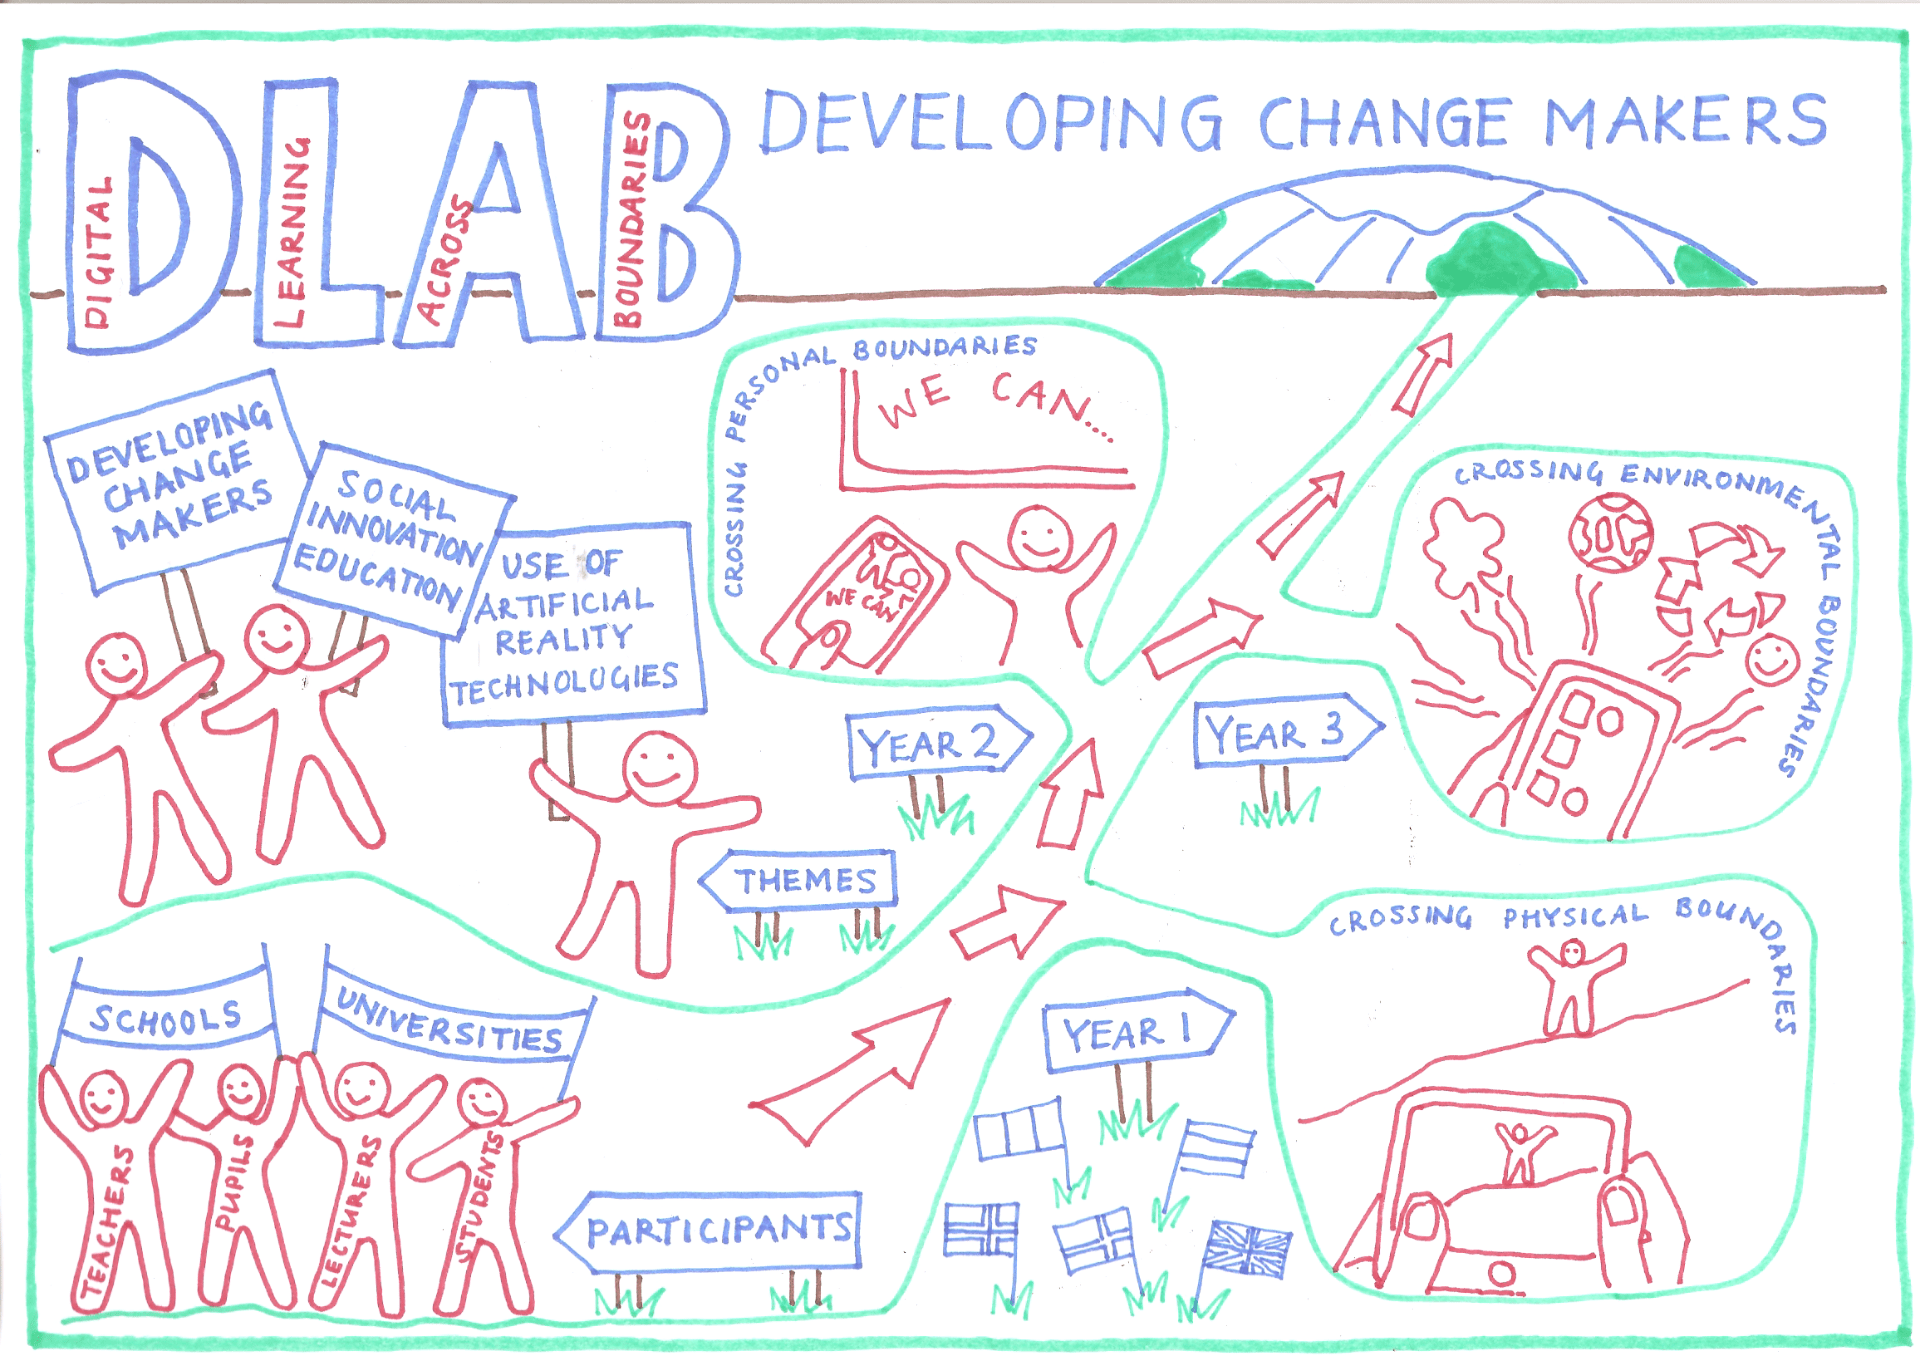 DLAB sketch note outlining the journey